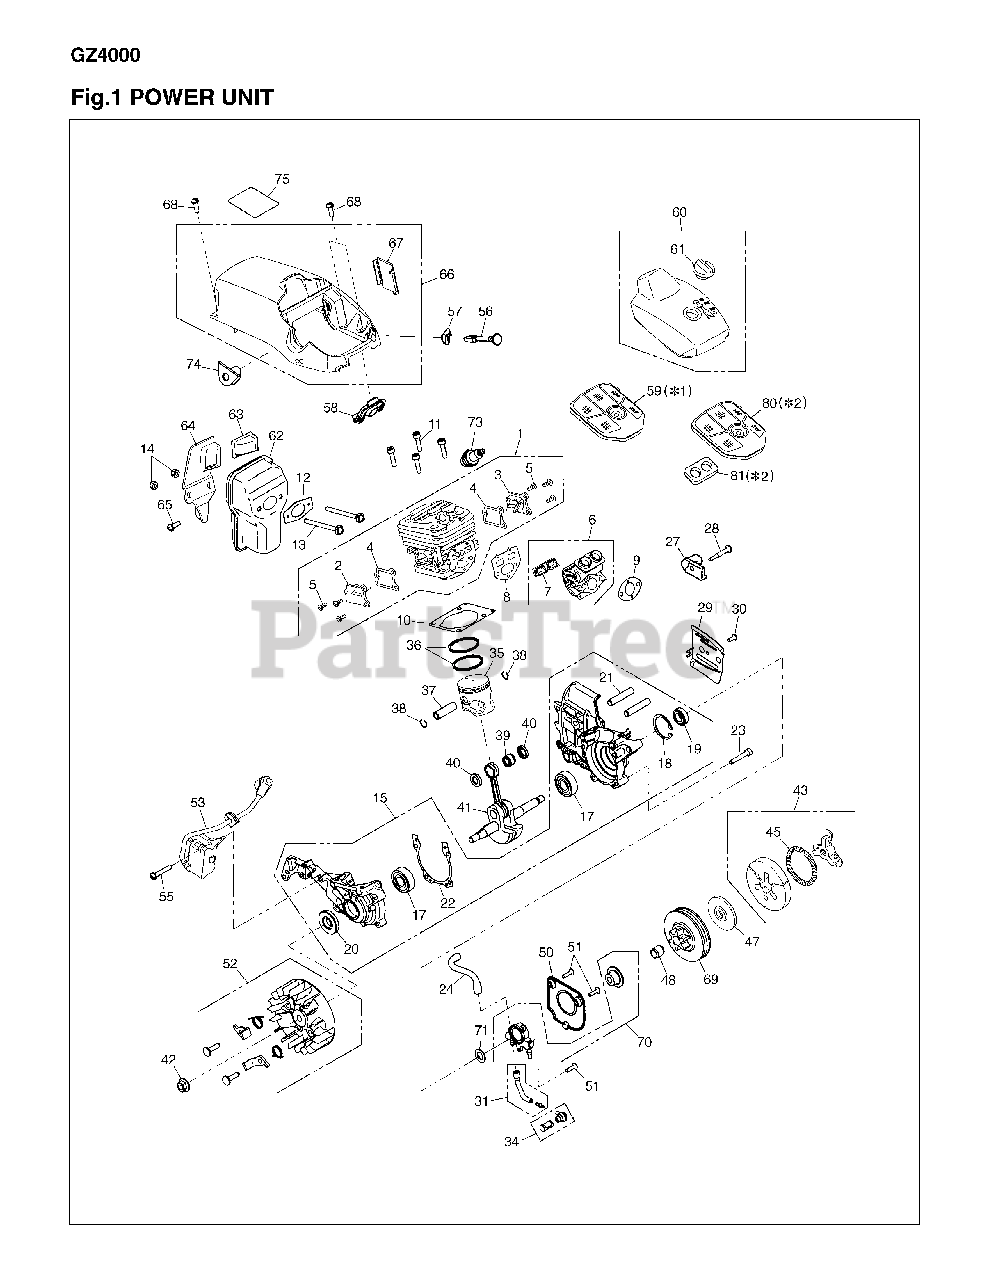 RedMax GZ 4000 - RedMax Chainsaw (2010-01) 002 - POWER UNIT-FIG 1 Parts